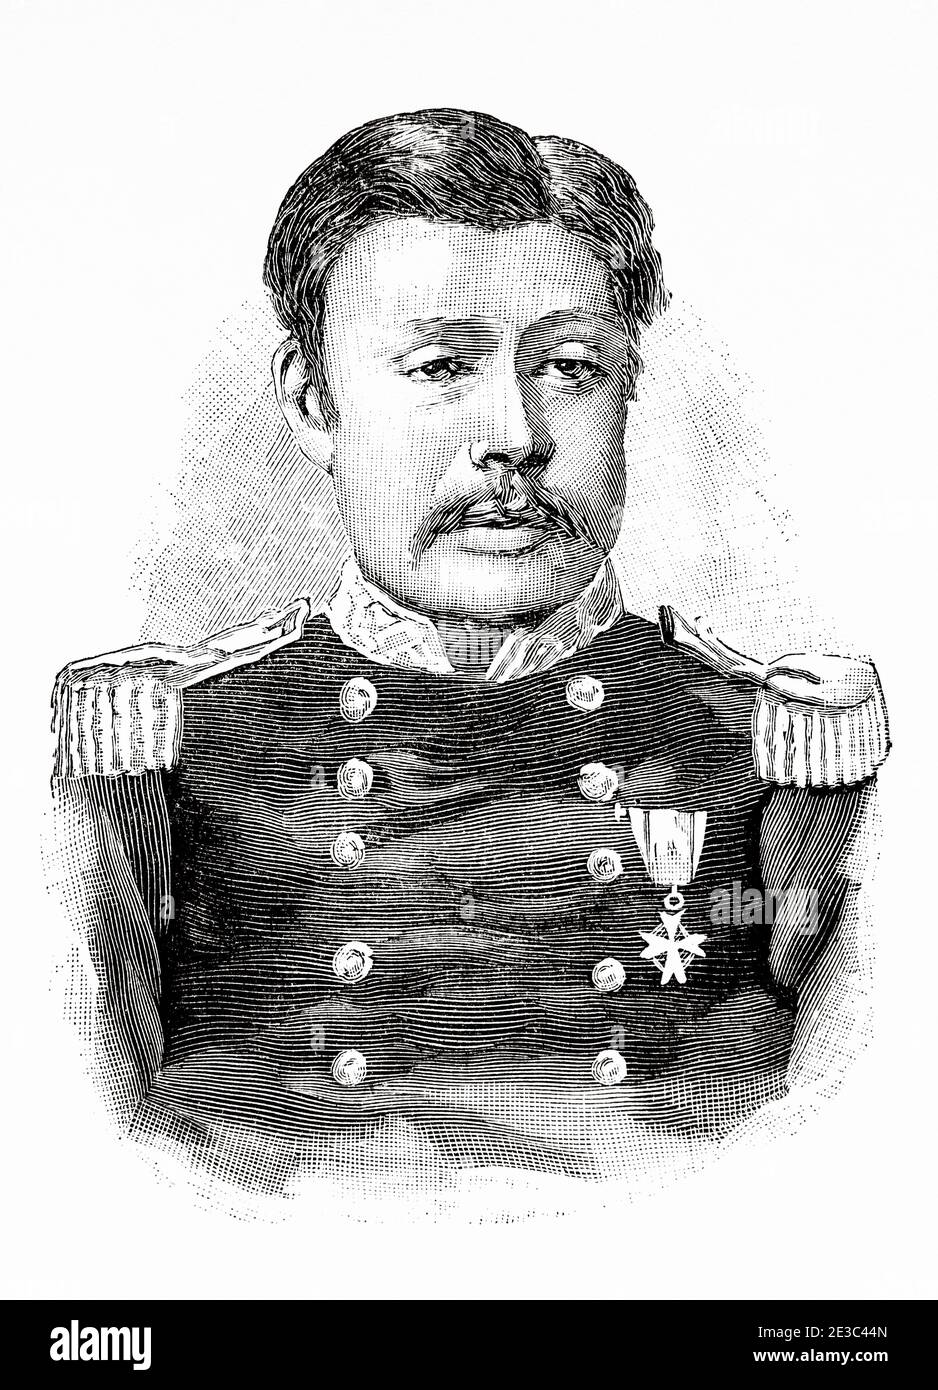 Portrait of Kabayama Sukenori (1837 - 1922) was a General of the Japanese Imperial Army and Admiral of the Japanese Imperial Navy. First Governor General of Japanese Taiwan. Old XIX century engraved illustration from La Ilustracion Española y Americana 1894 Stock Photo